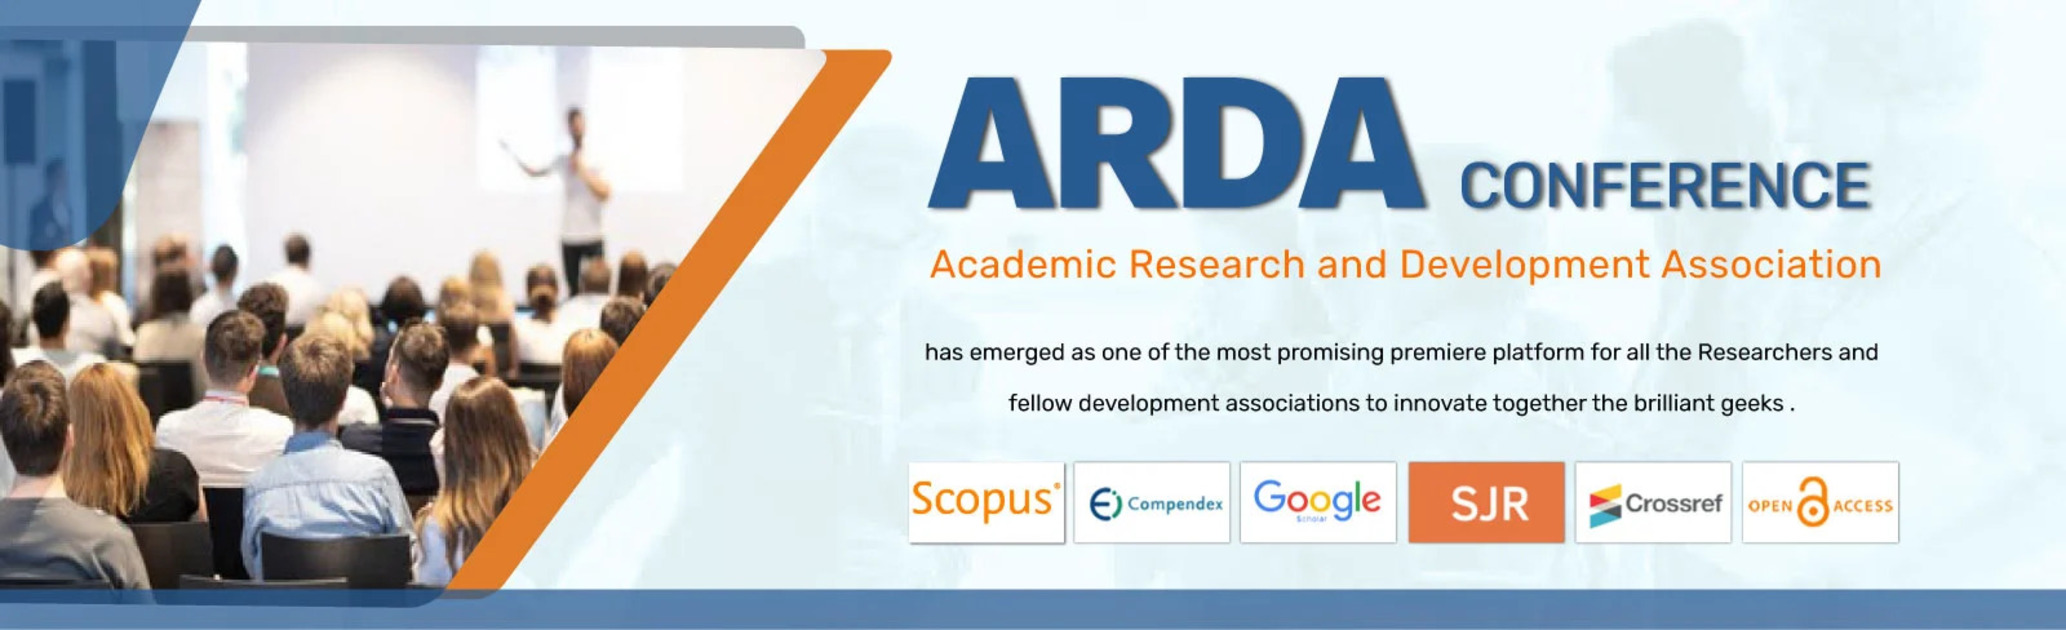 International Conferences and Publications - ARDA Conference